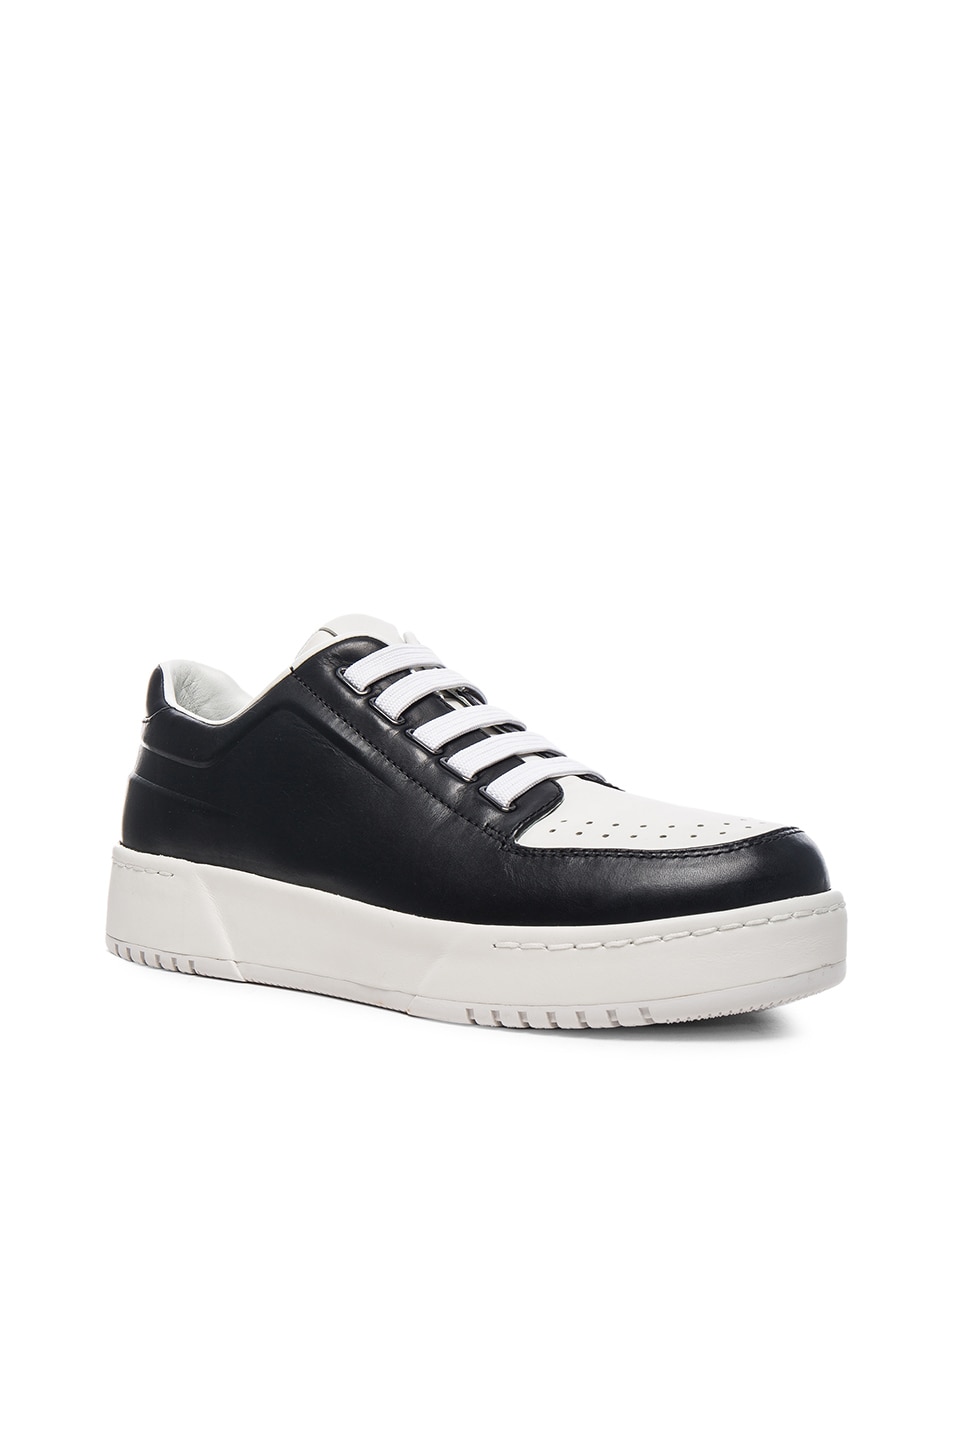 Image 1 of 3.1 phillip lim PL31 Low Top Leather Sneakers in Black & White